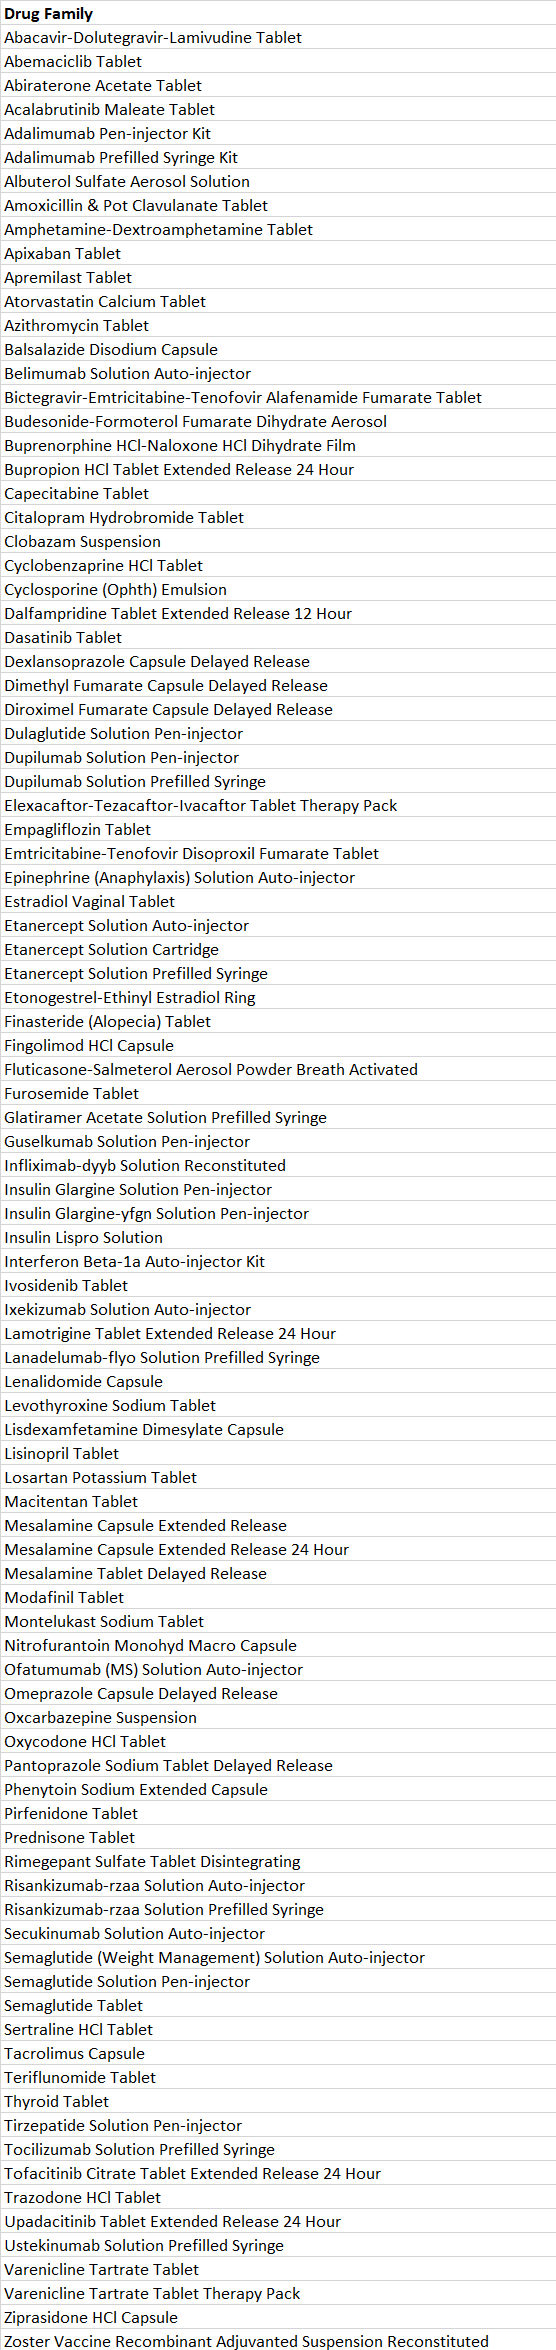 List of drug product families for calendar year 2023